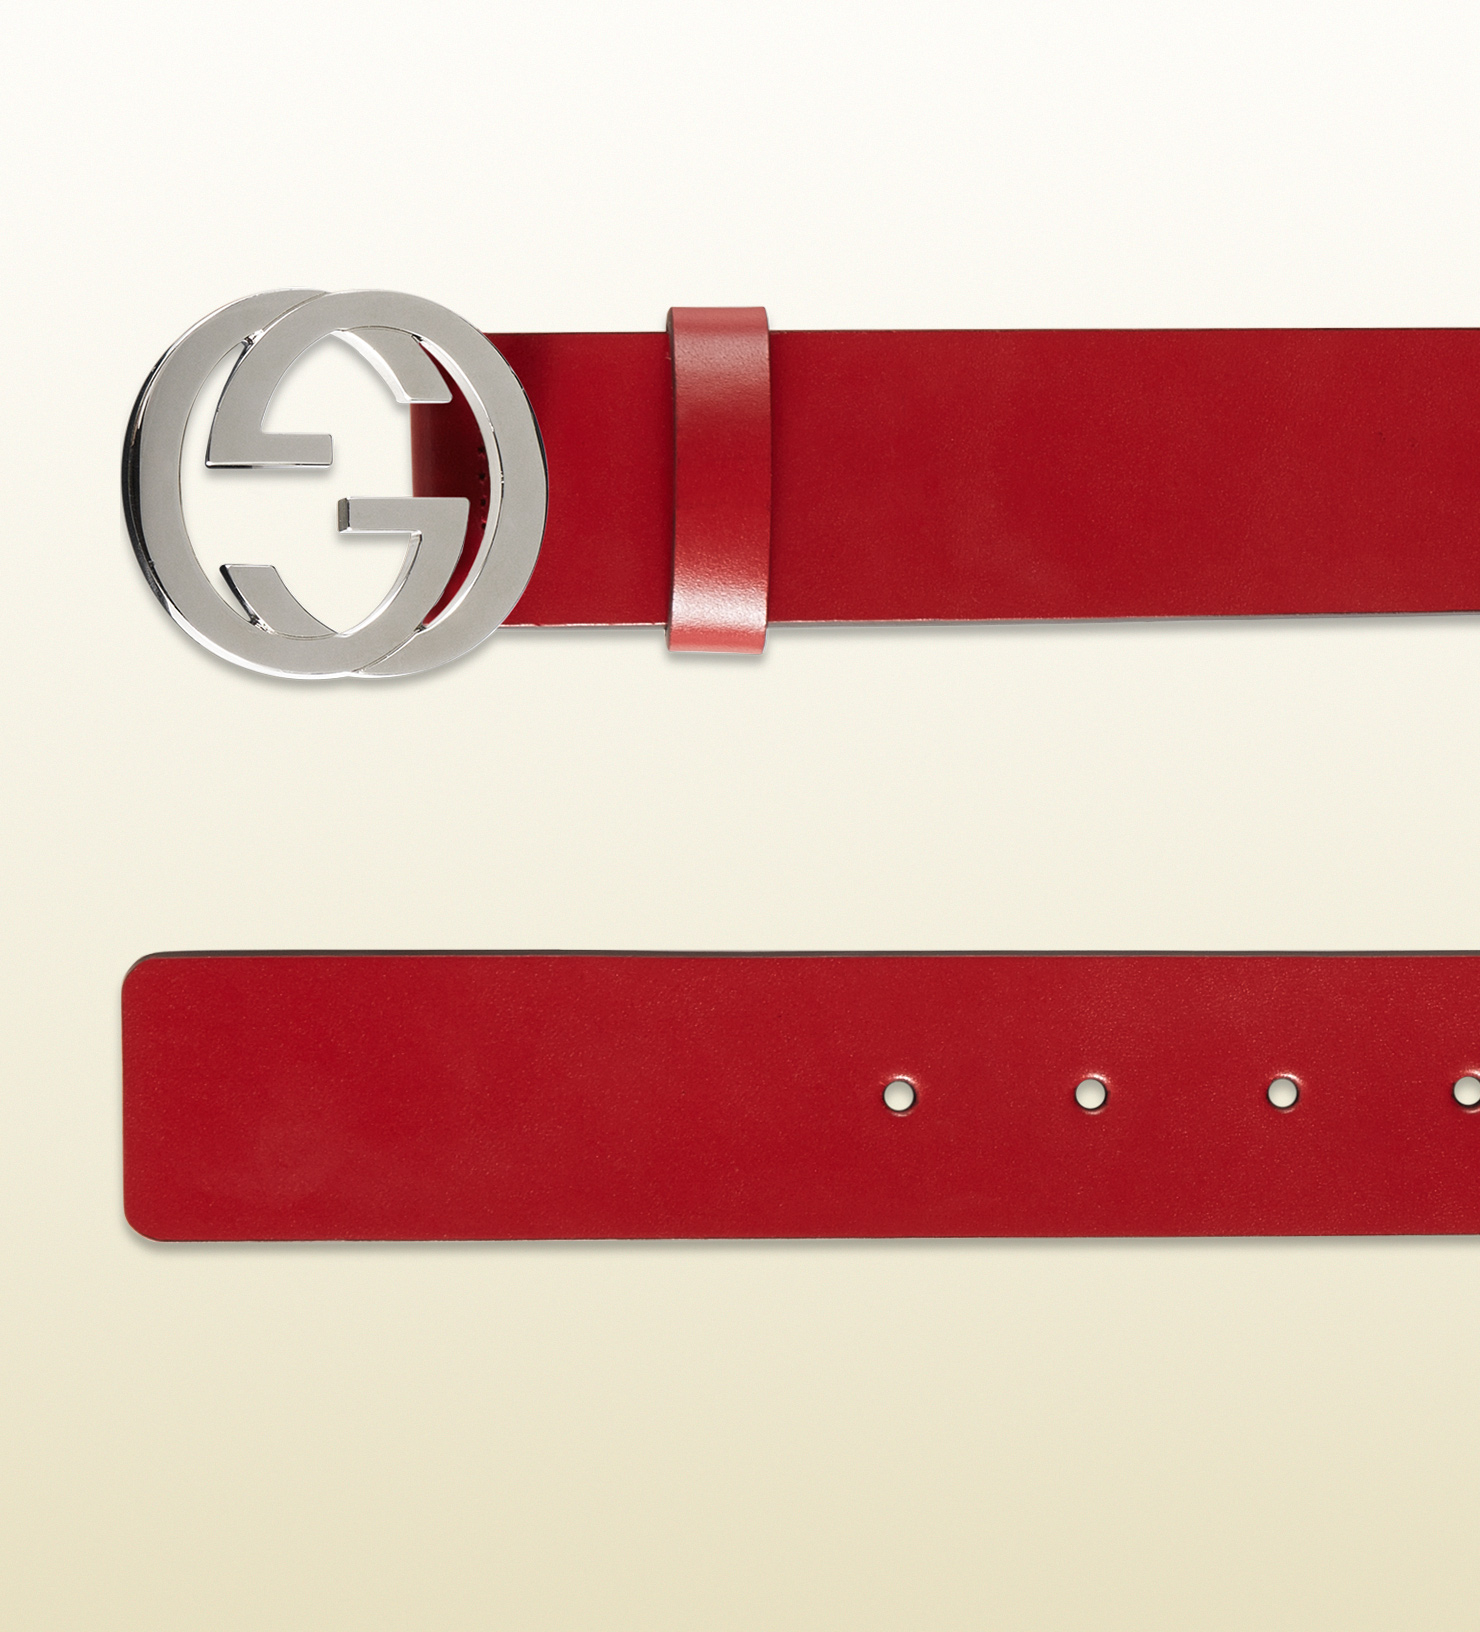 Lyst - Gucci Leather Belt With Interlocking G Buckle in Red for Men